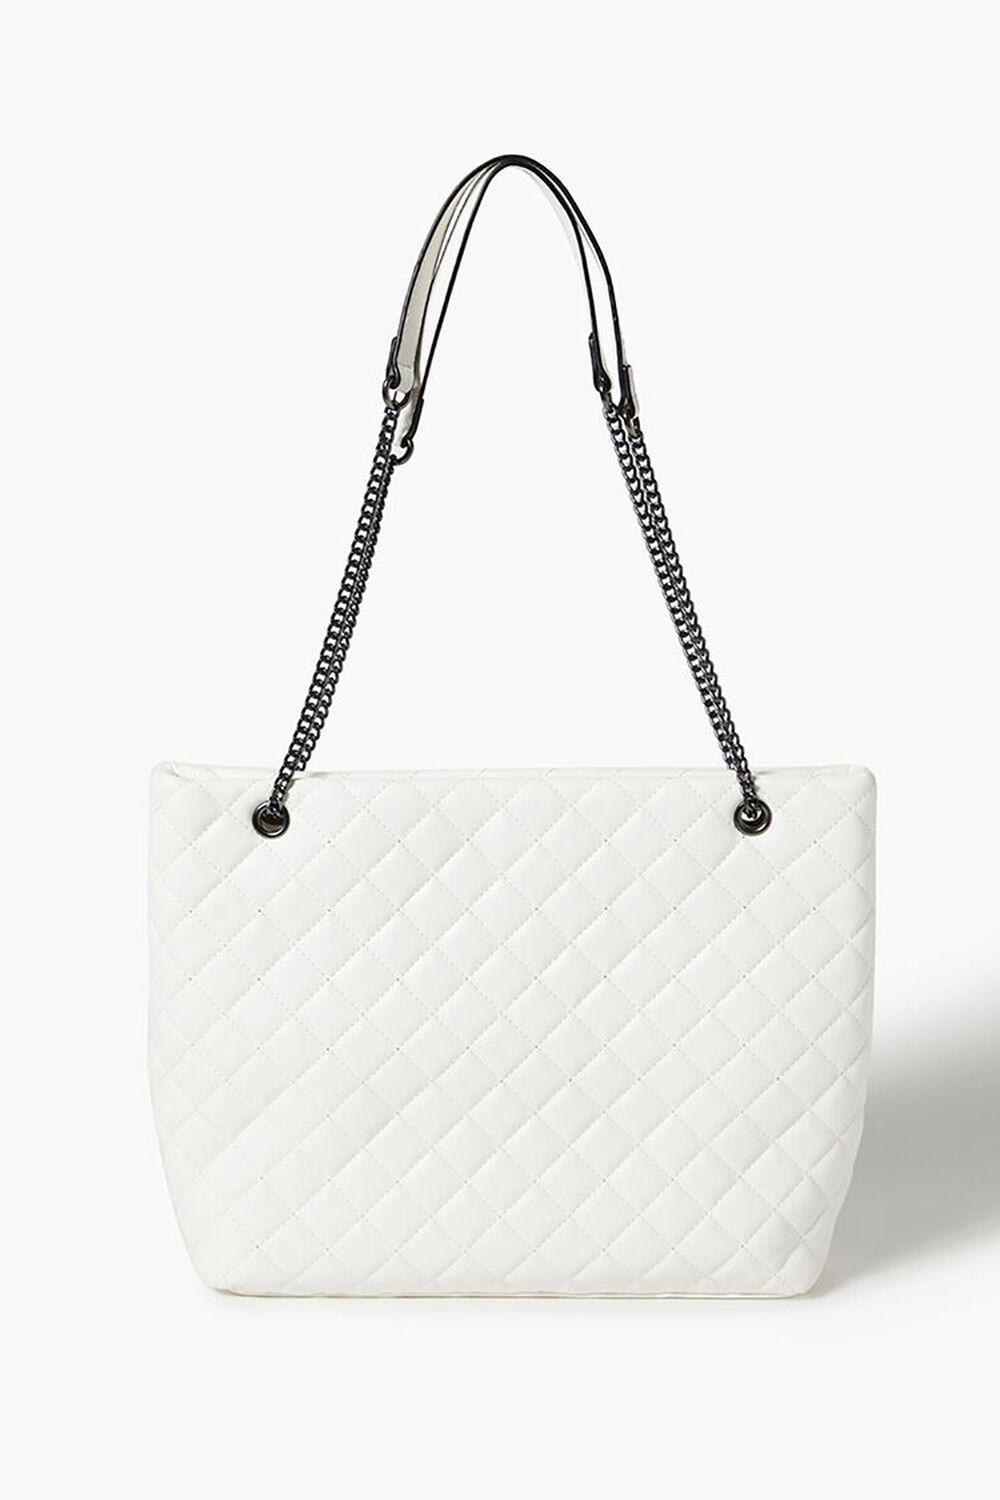 The Symmetrical, Leather Quilted Shoulder Bag